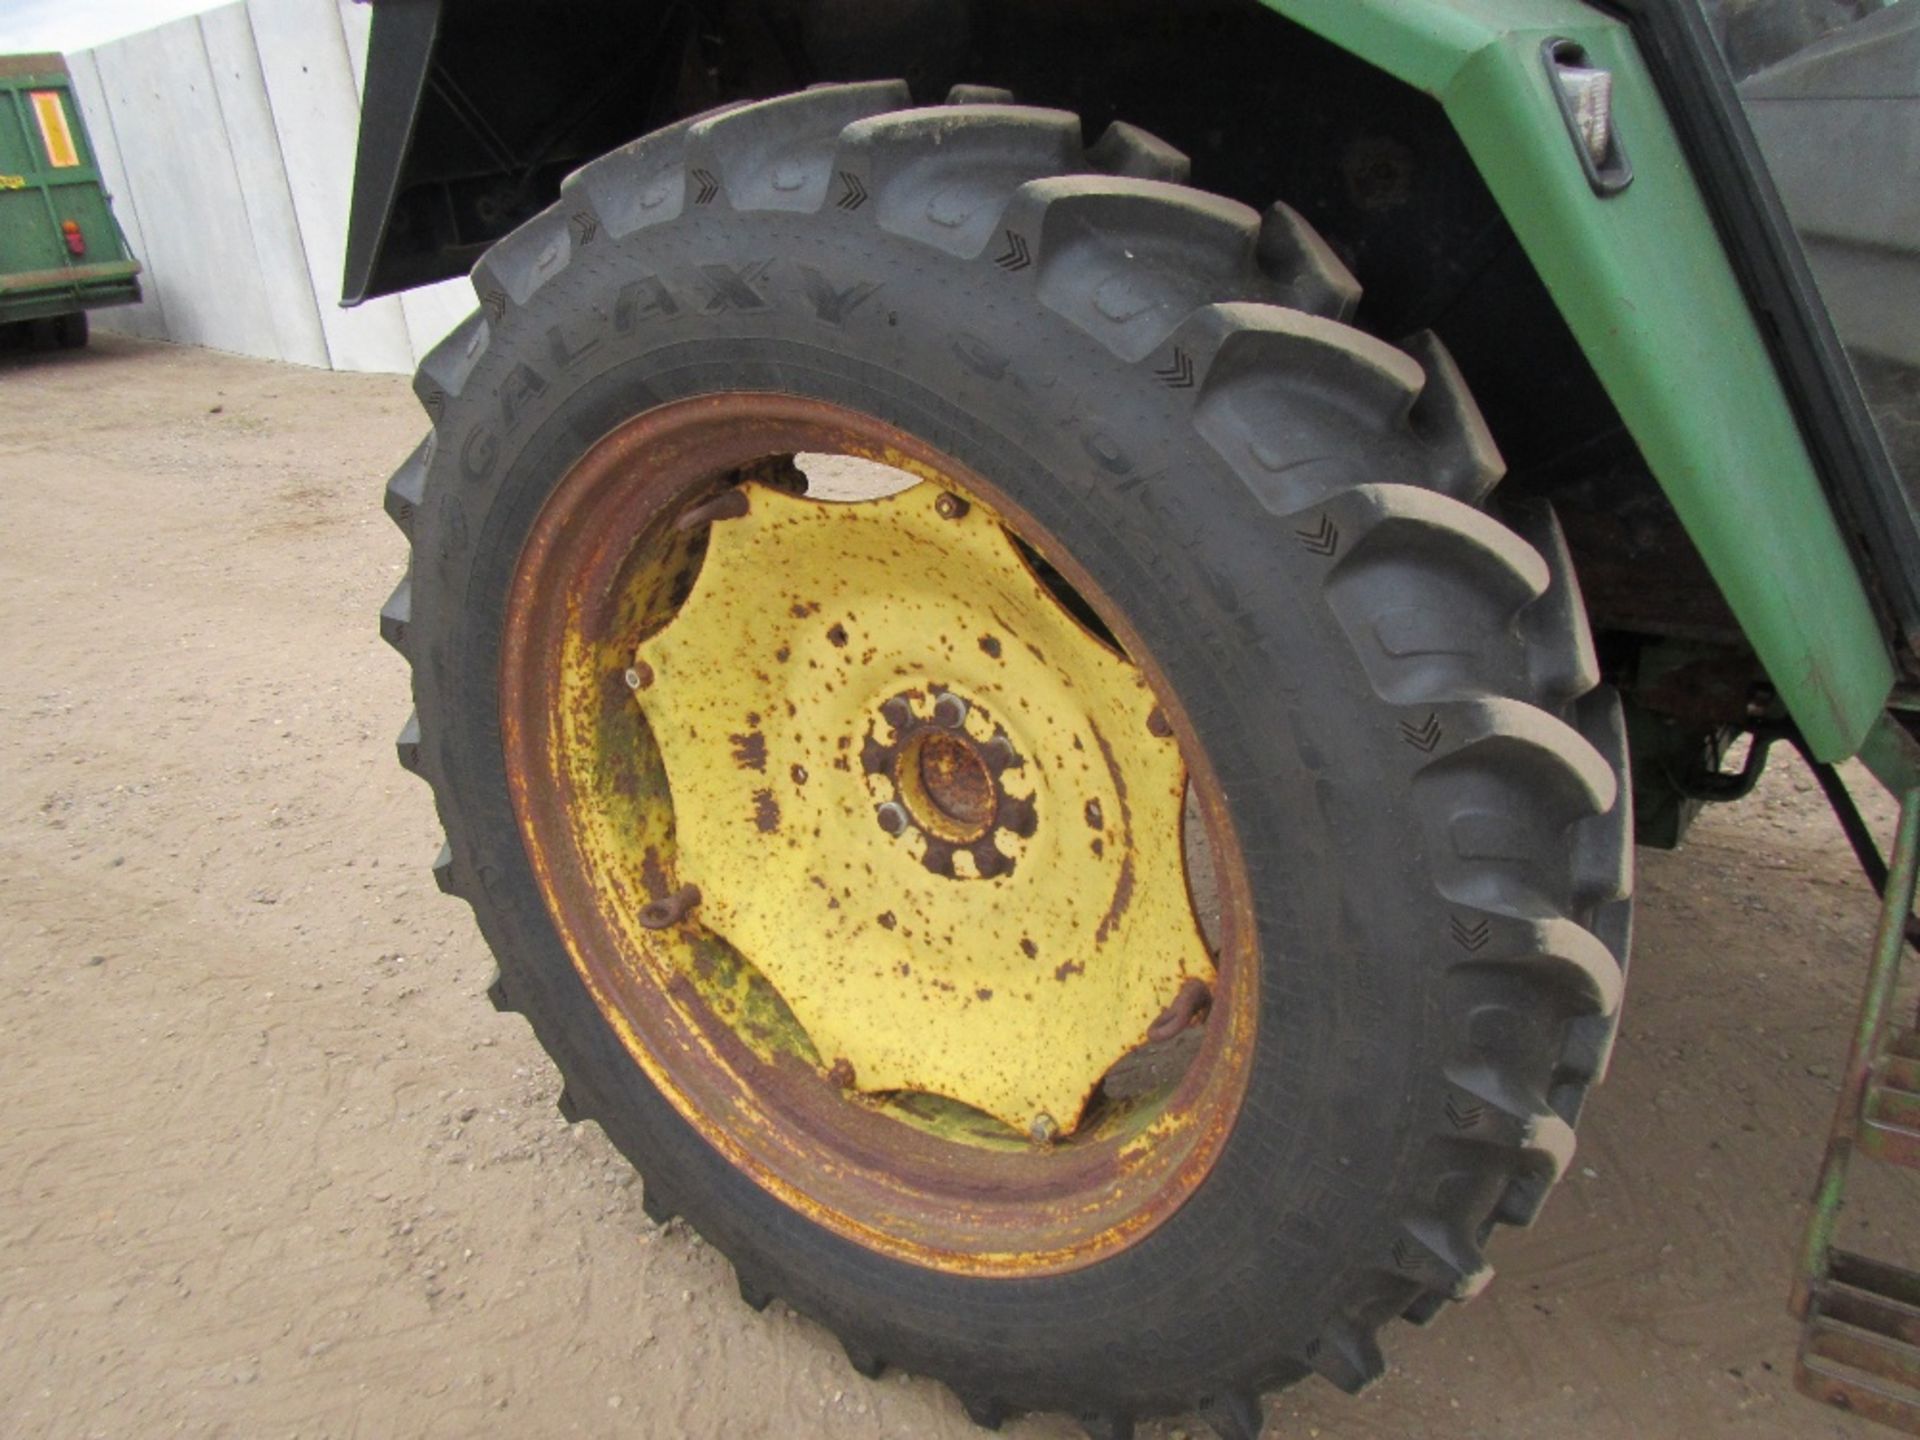 John Deere 3040 4wd Tractor. Subject to TOTAL LOSS INSURANCE CLAIM Reg. No. A122 VFE - Image 5 of 12